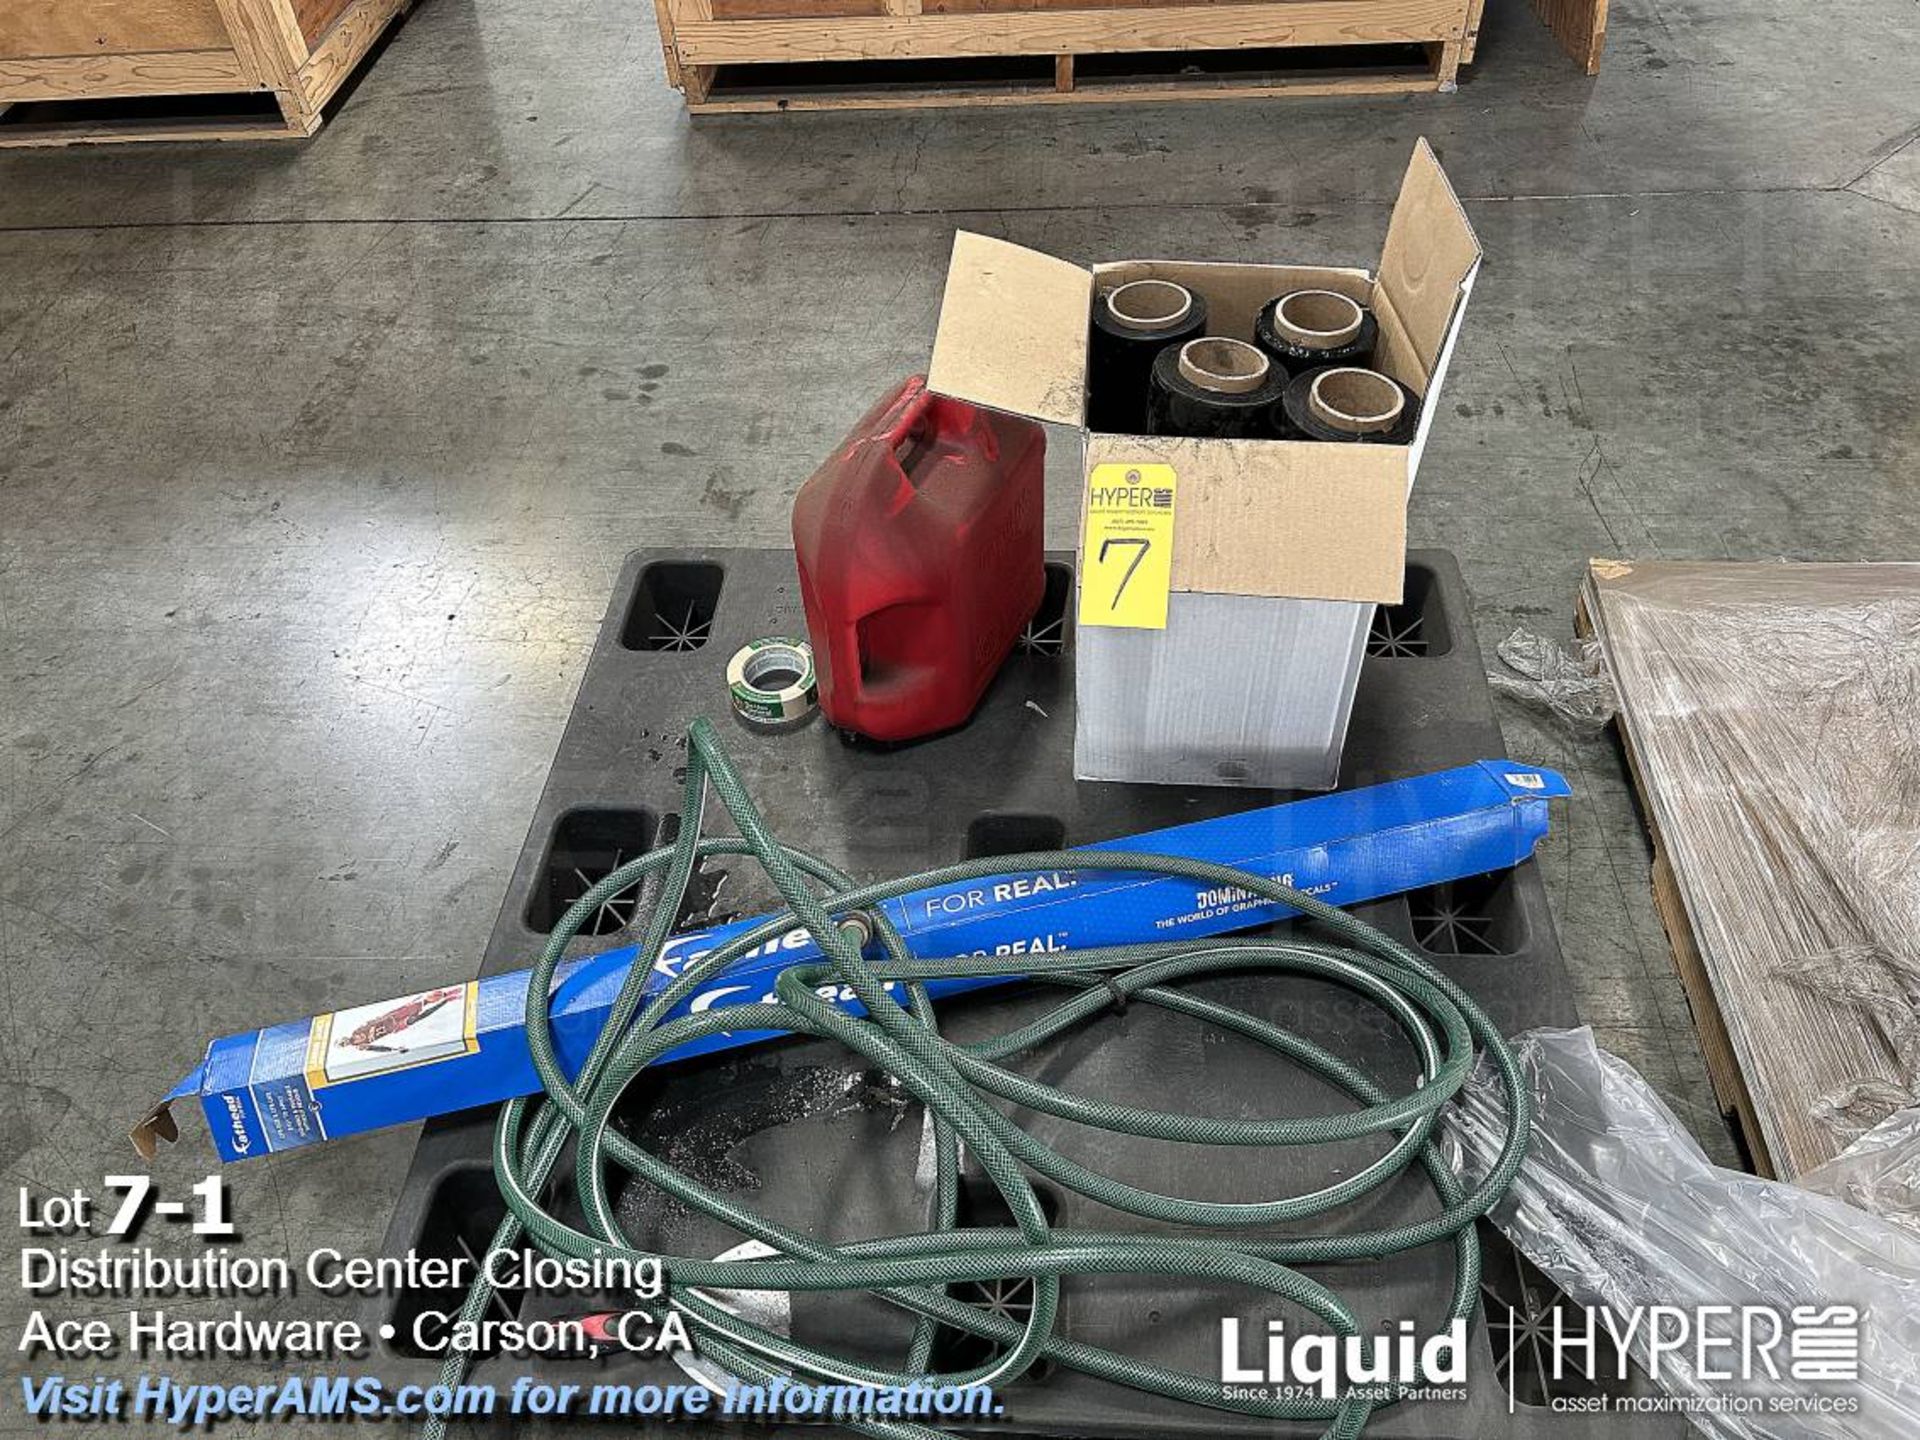 Lot: shrink wrap, gas can, and hose